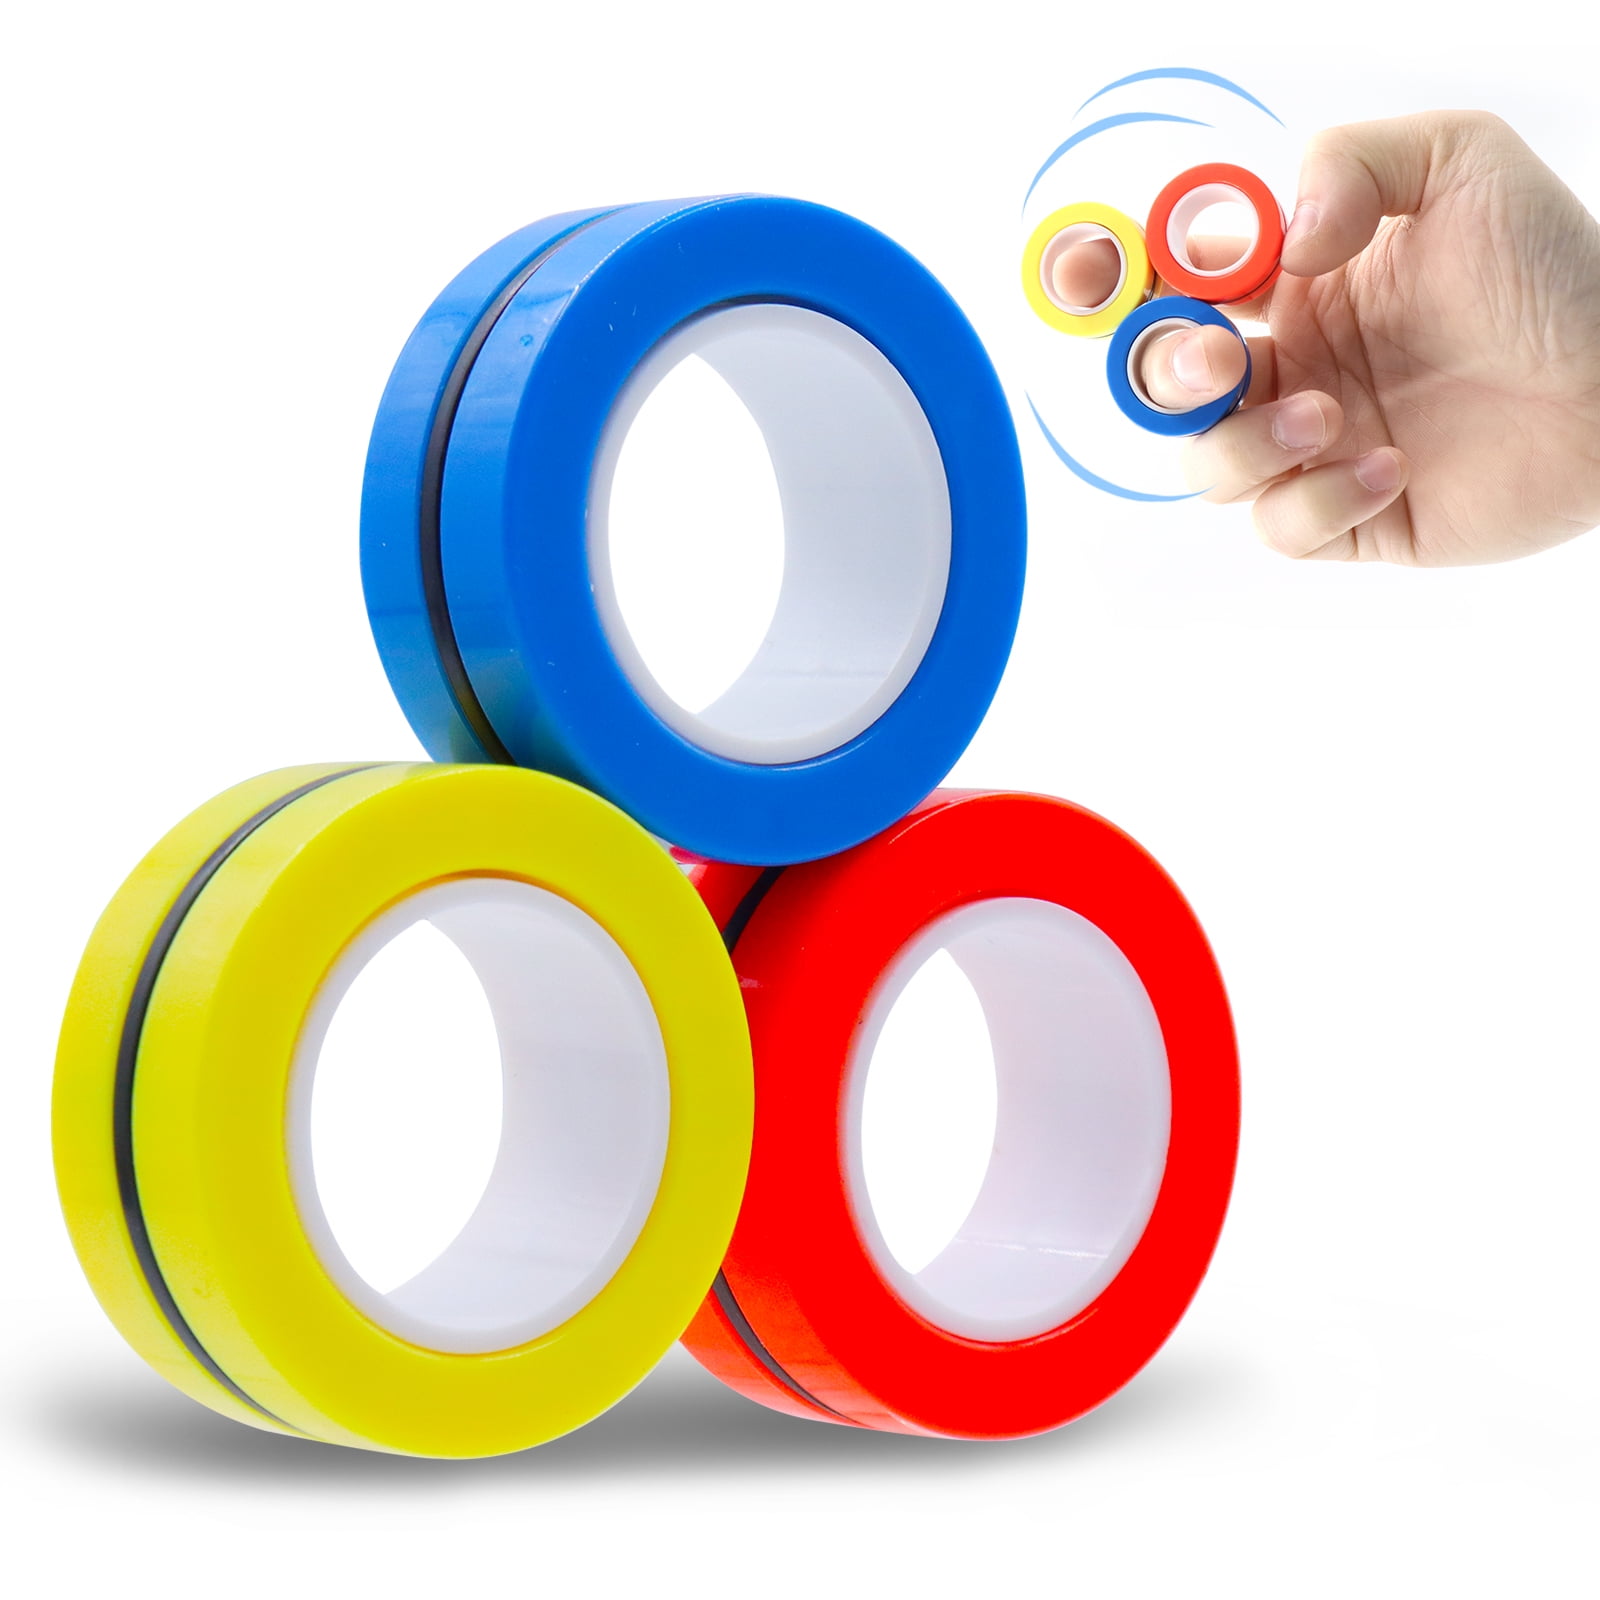 Yellow Anti-Stress Therapeutic Purposes Finger Spinner Stress Relief Toy Hand Spinner Decompression Tool for Creative Bella Bora Magnetic Ring Fidget Toy Suitable for Kids and Adults 